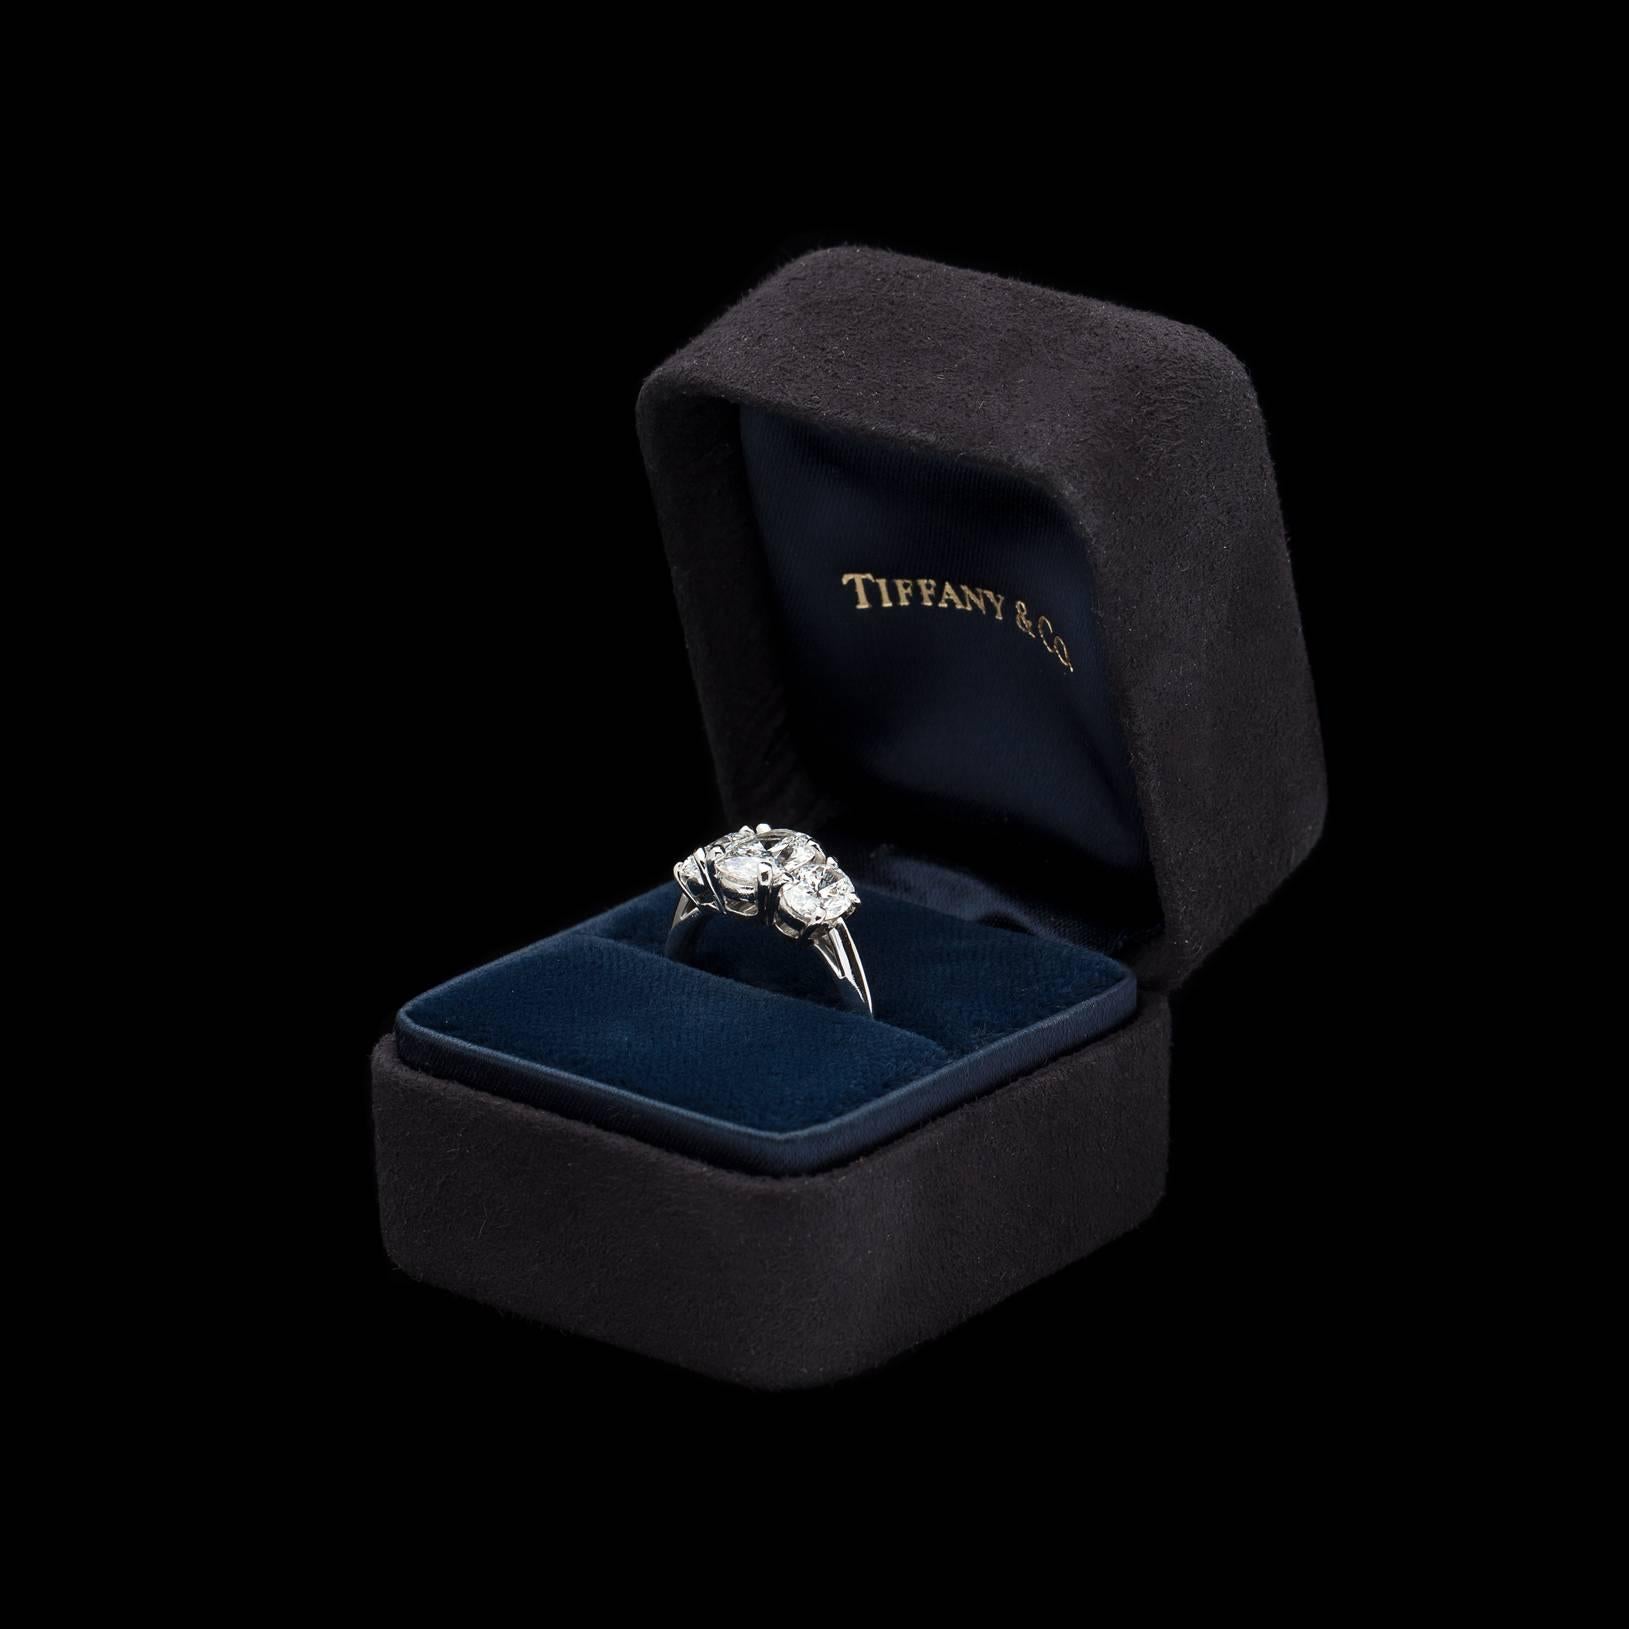 Breathtaking Three Stone Oval Cut Diamond Platinum Ring by the one and only Tiffany & Co. This stunner features F Color VVS Clarity Diamonds with a 2.45 carat total weight. The gorgeous center stone weighs 1.25 carats and is accompanied by GIA